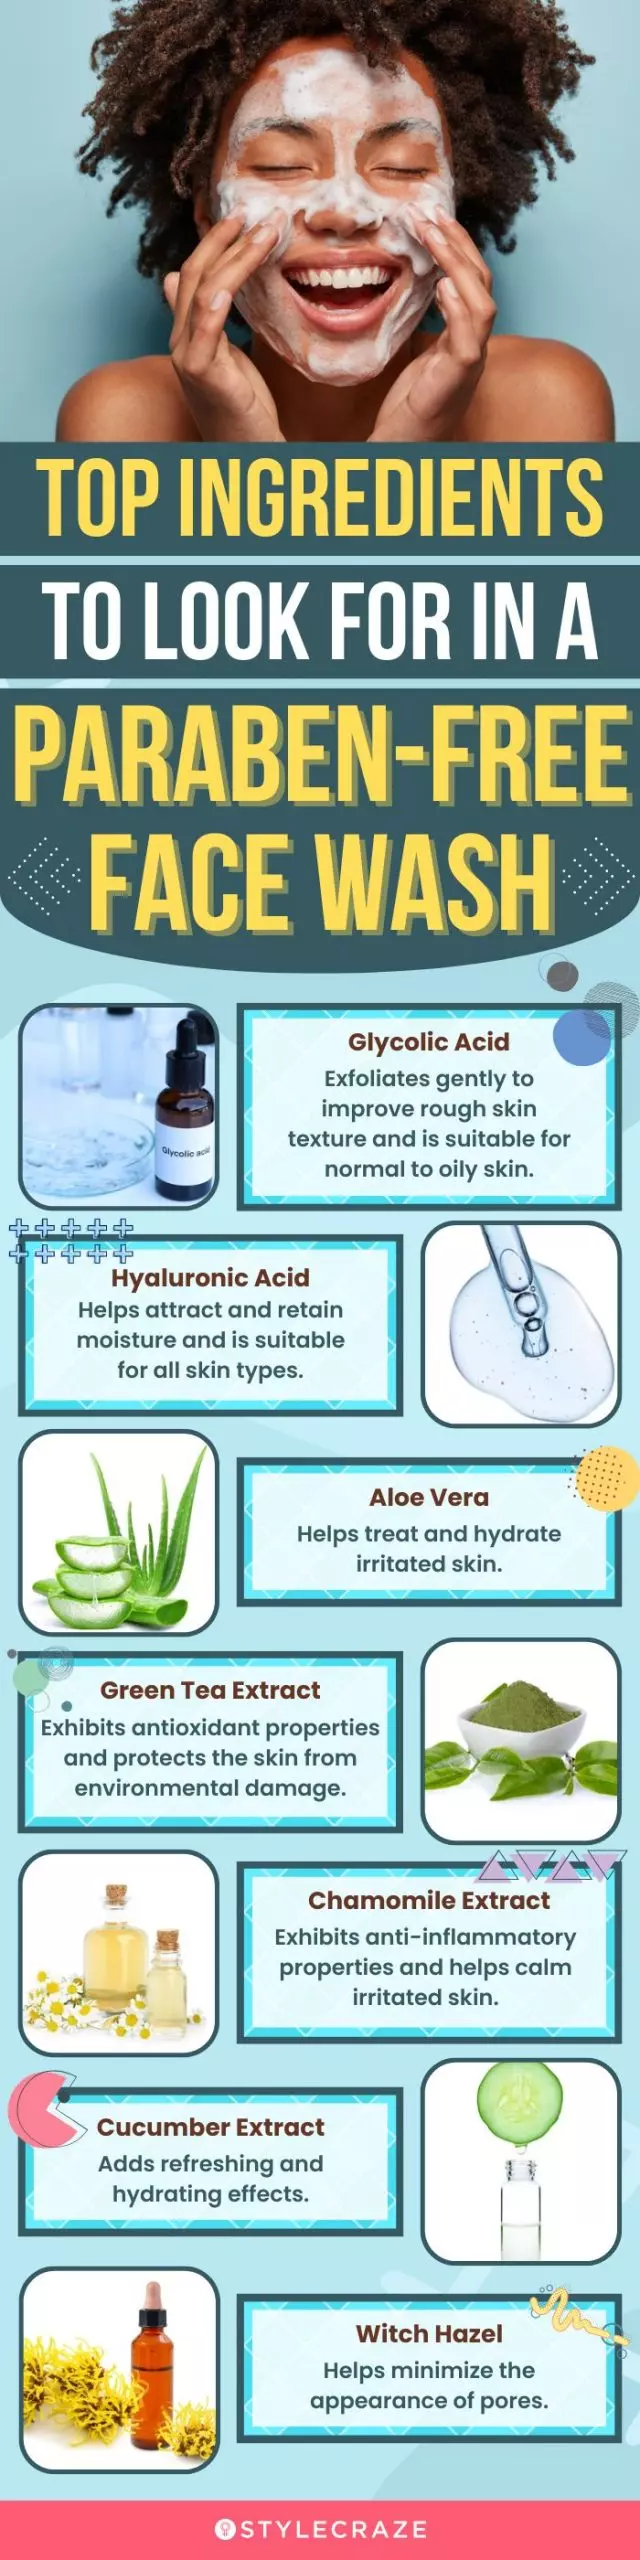 Top Ingredients To Look For In A Paraben-Free Face Wash (infographic)